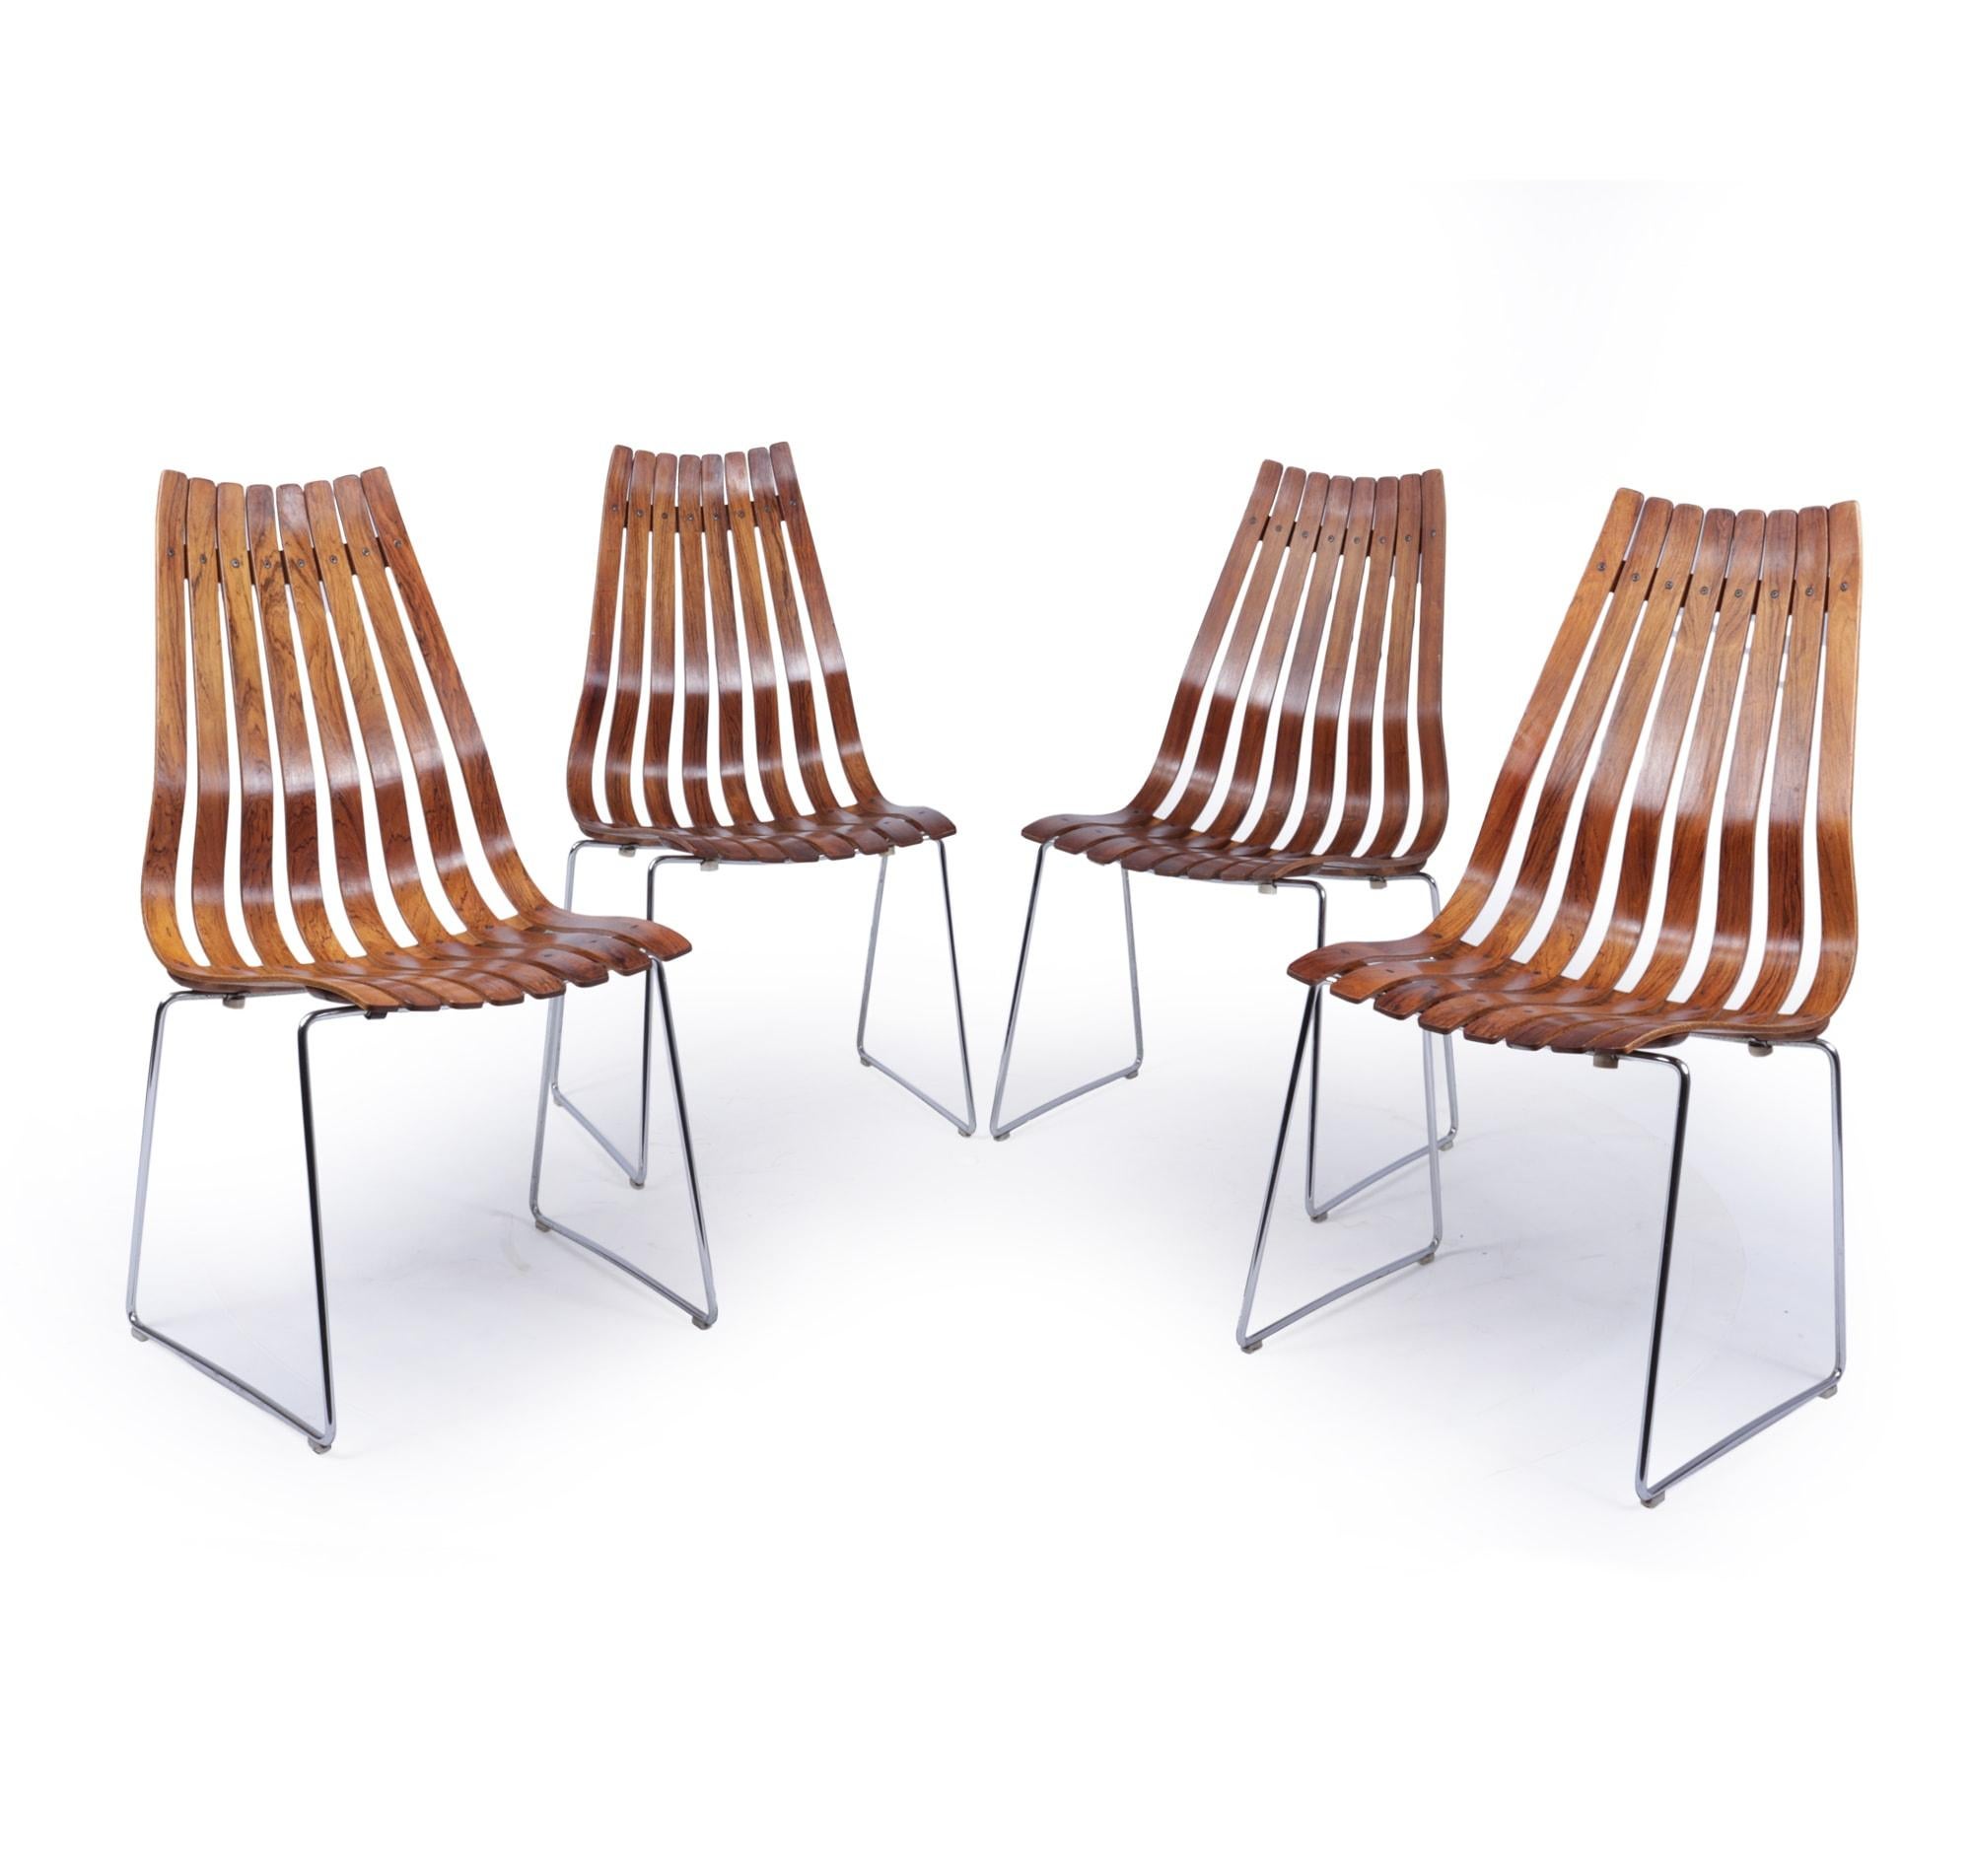 Norwegian Mid Century Dining Chairs by Hans Brattrud for Hove Mobler, Set of 4